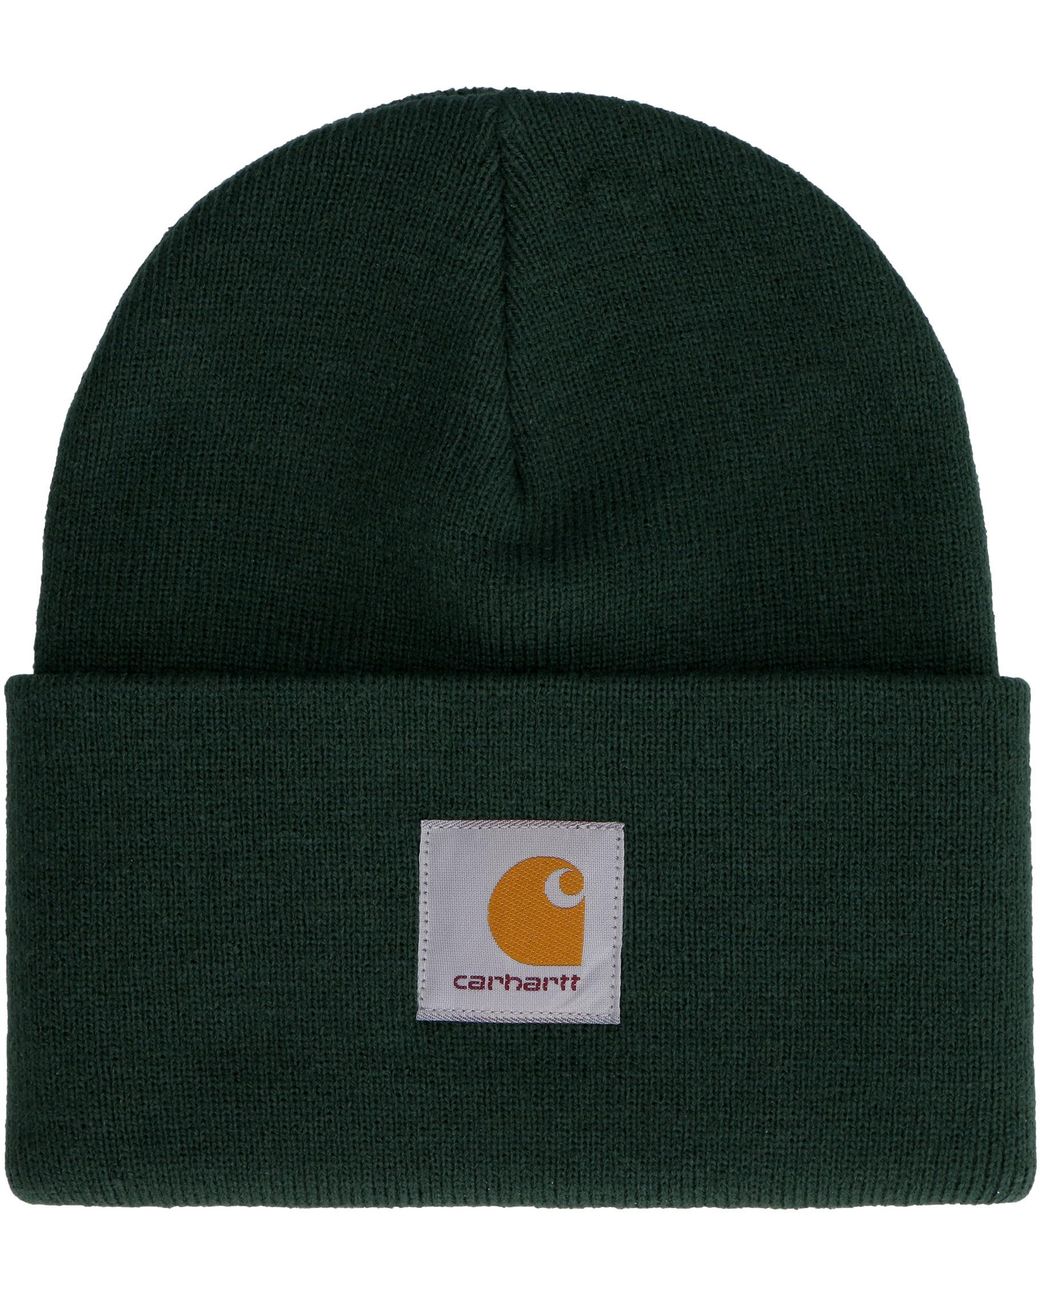 Carhartt Synthetic Ribbed Knit Beanie in Green for Men - Lyst